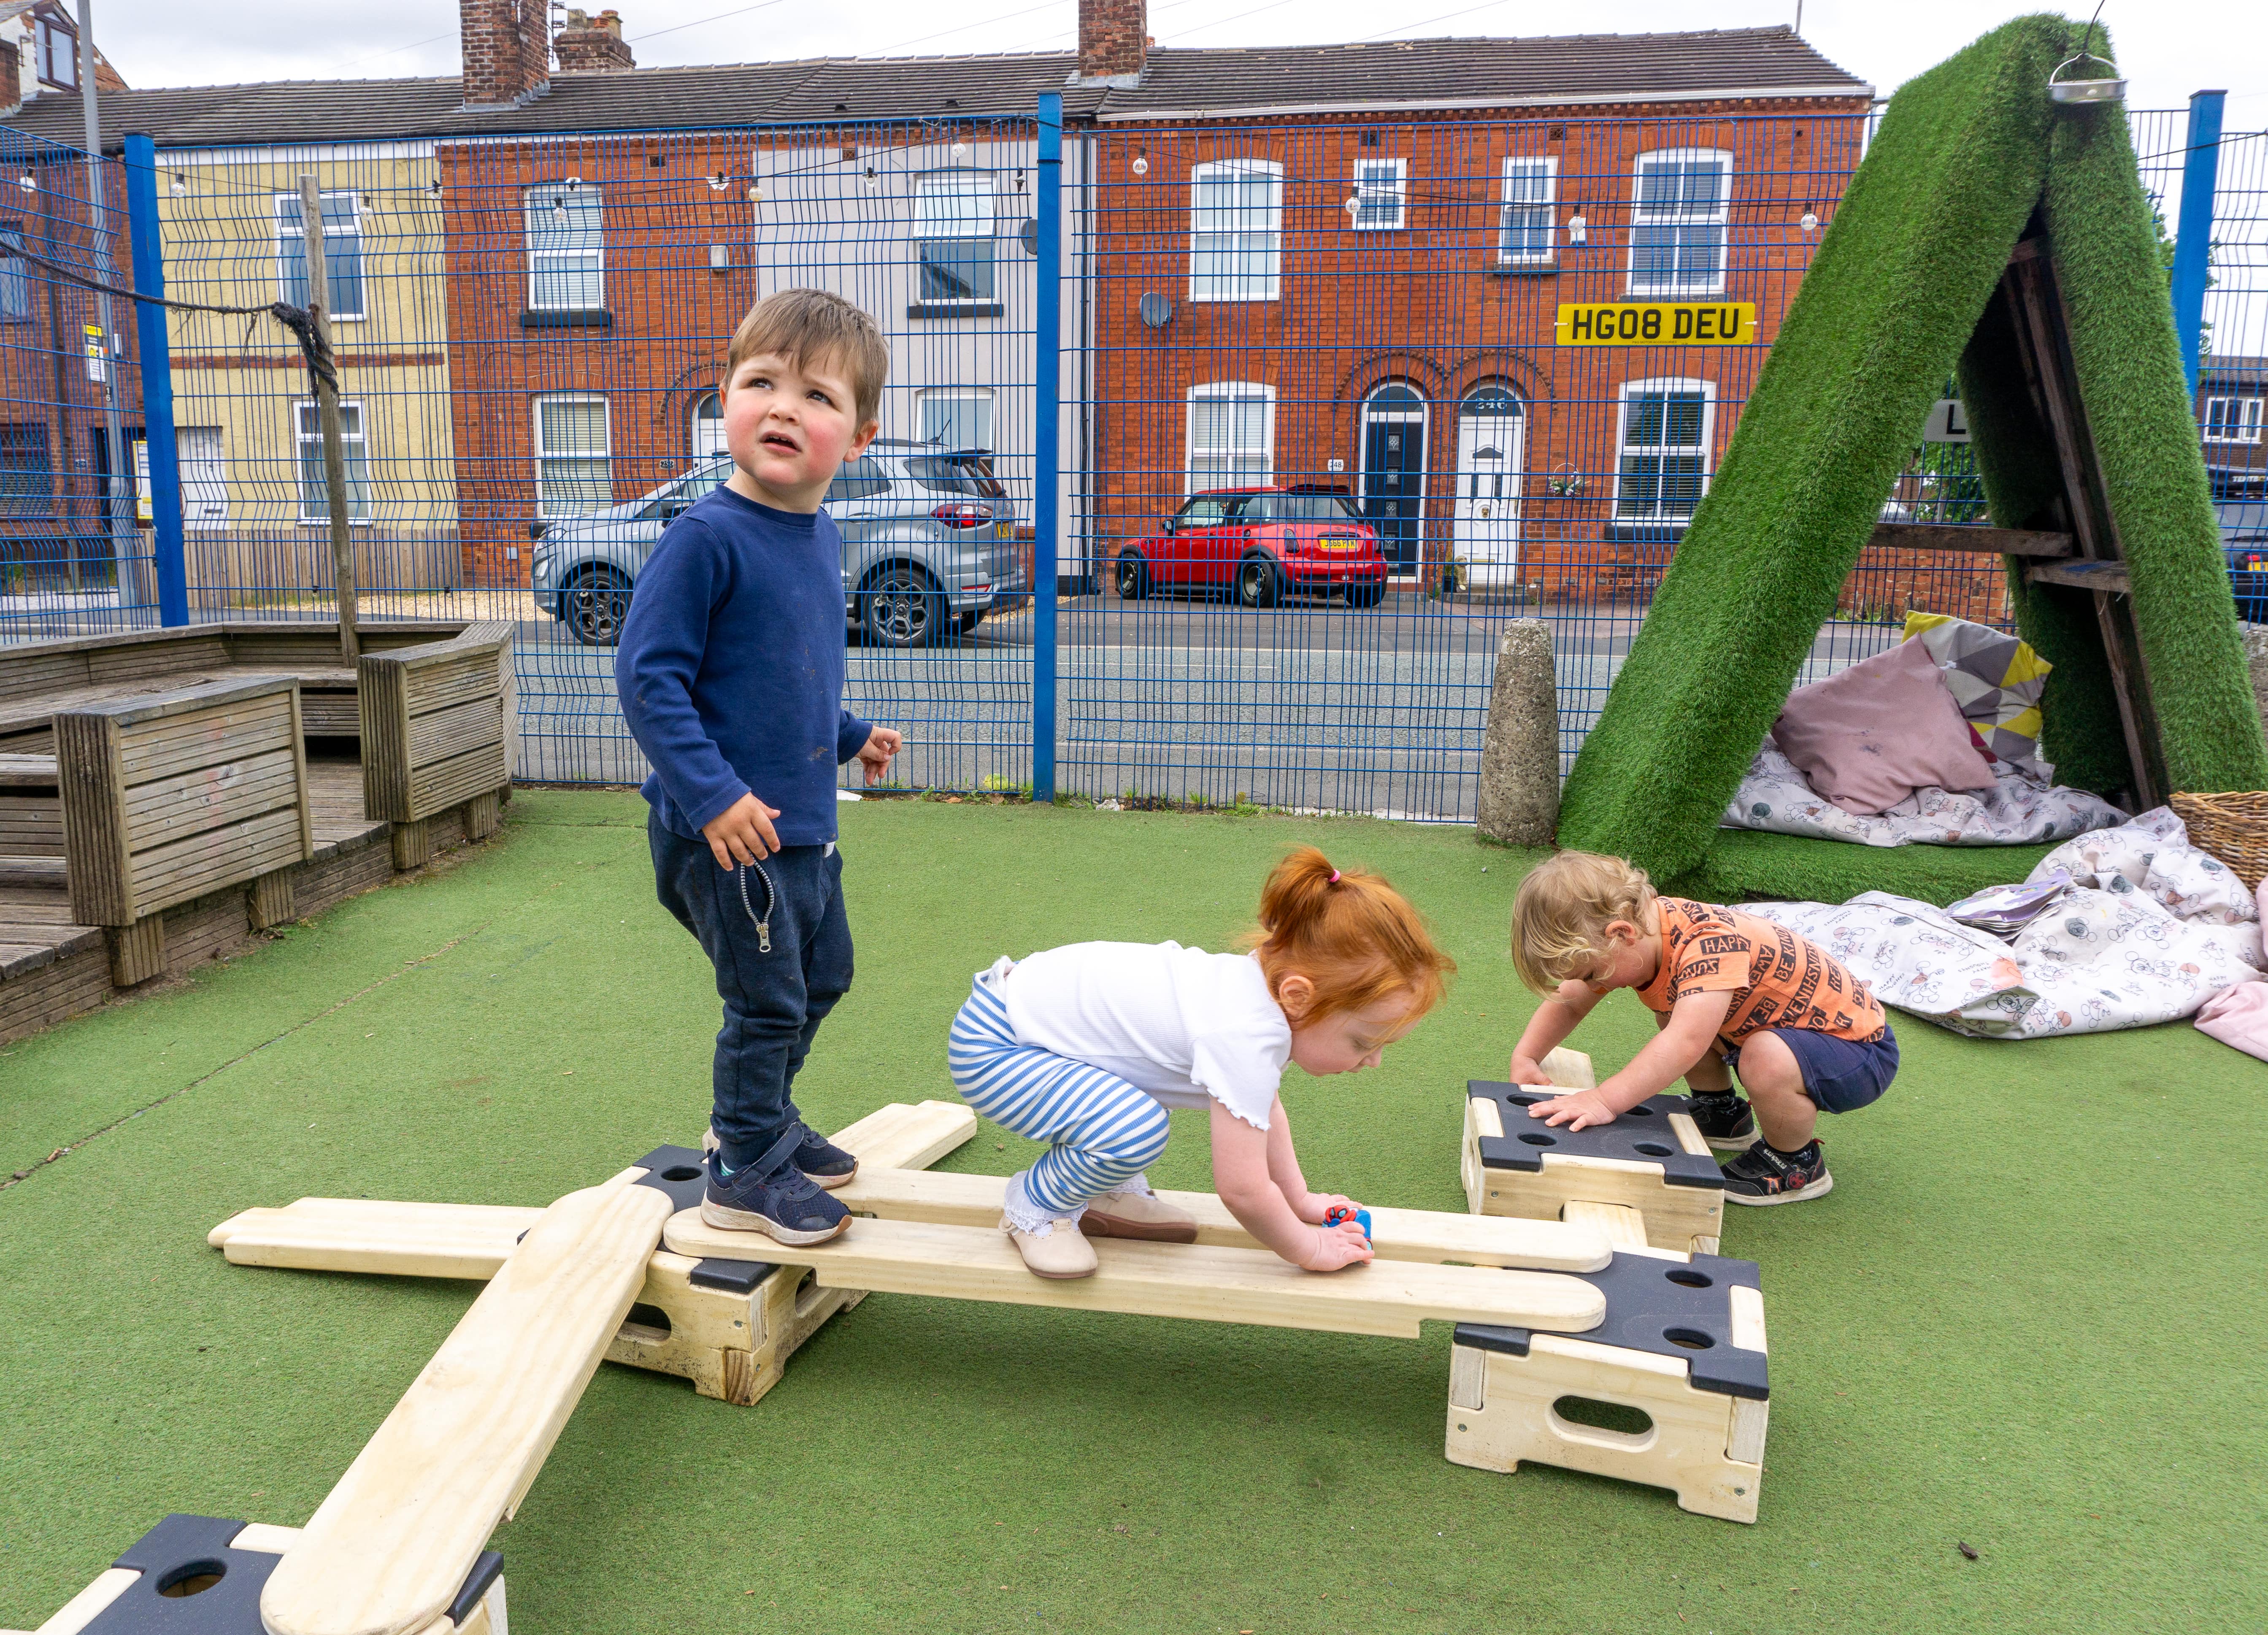 3 children are engaging with the Play Builder Apprentice set. A boy is stood on one of the blocks and is looking towards the camera, whilst a little girl and boy are busy moving the planks and altering it.